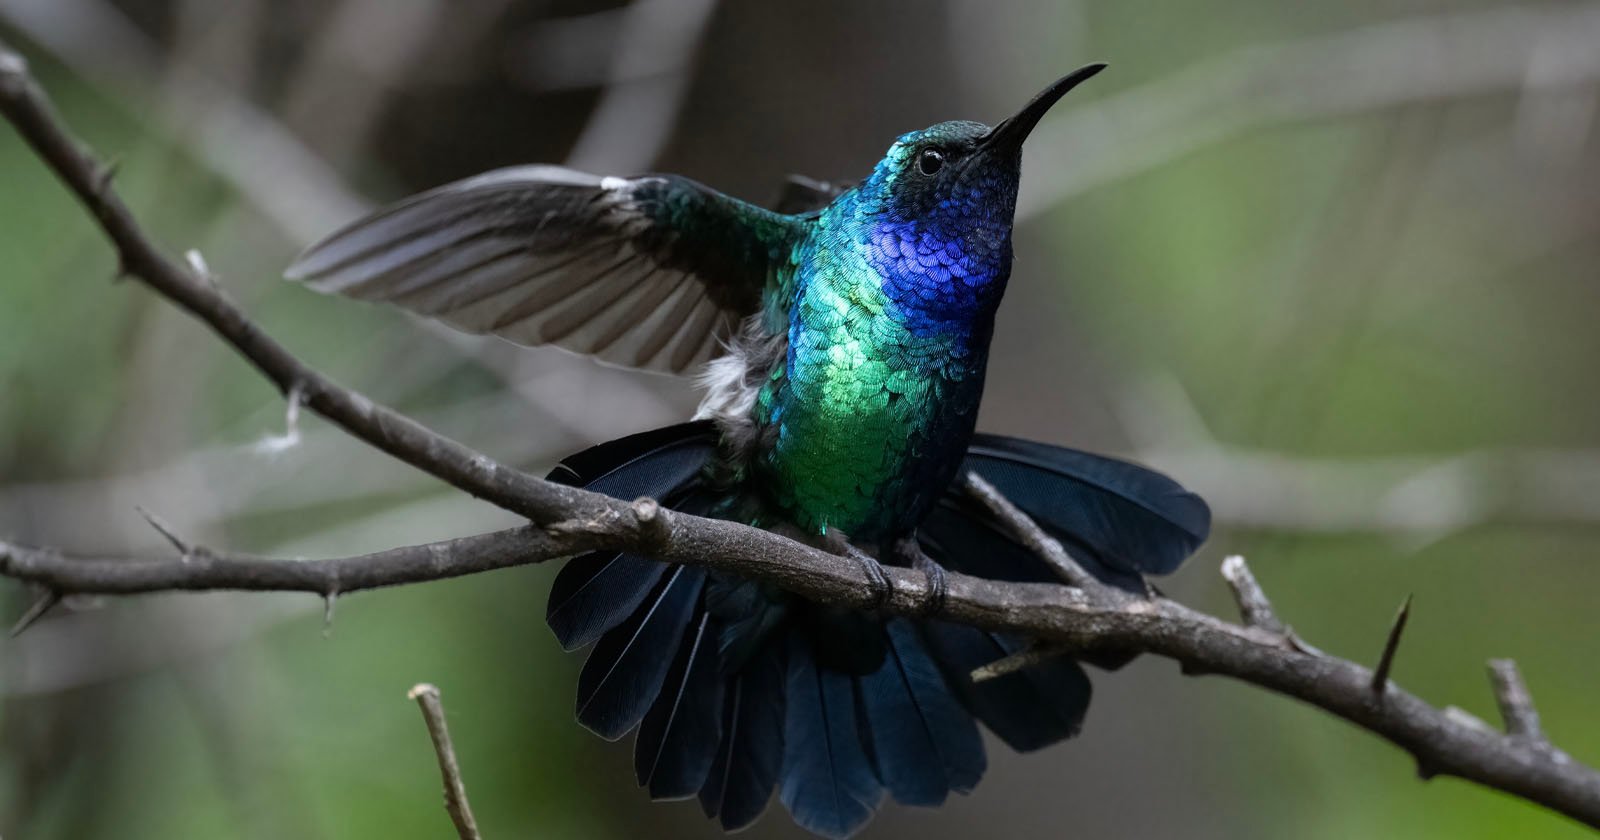 New Photos Show One of the Worlds Rarest Hummingbirds